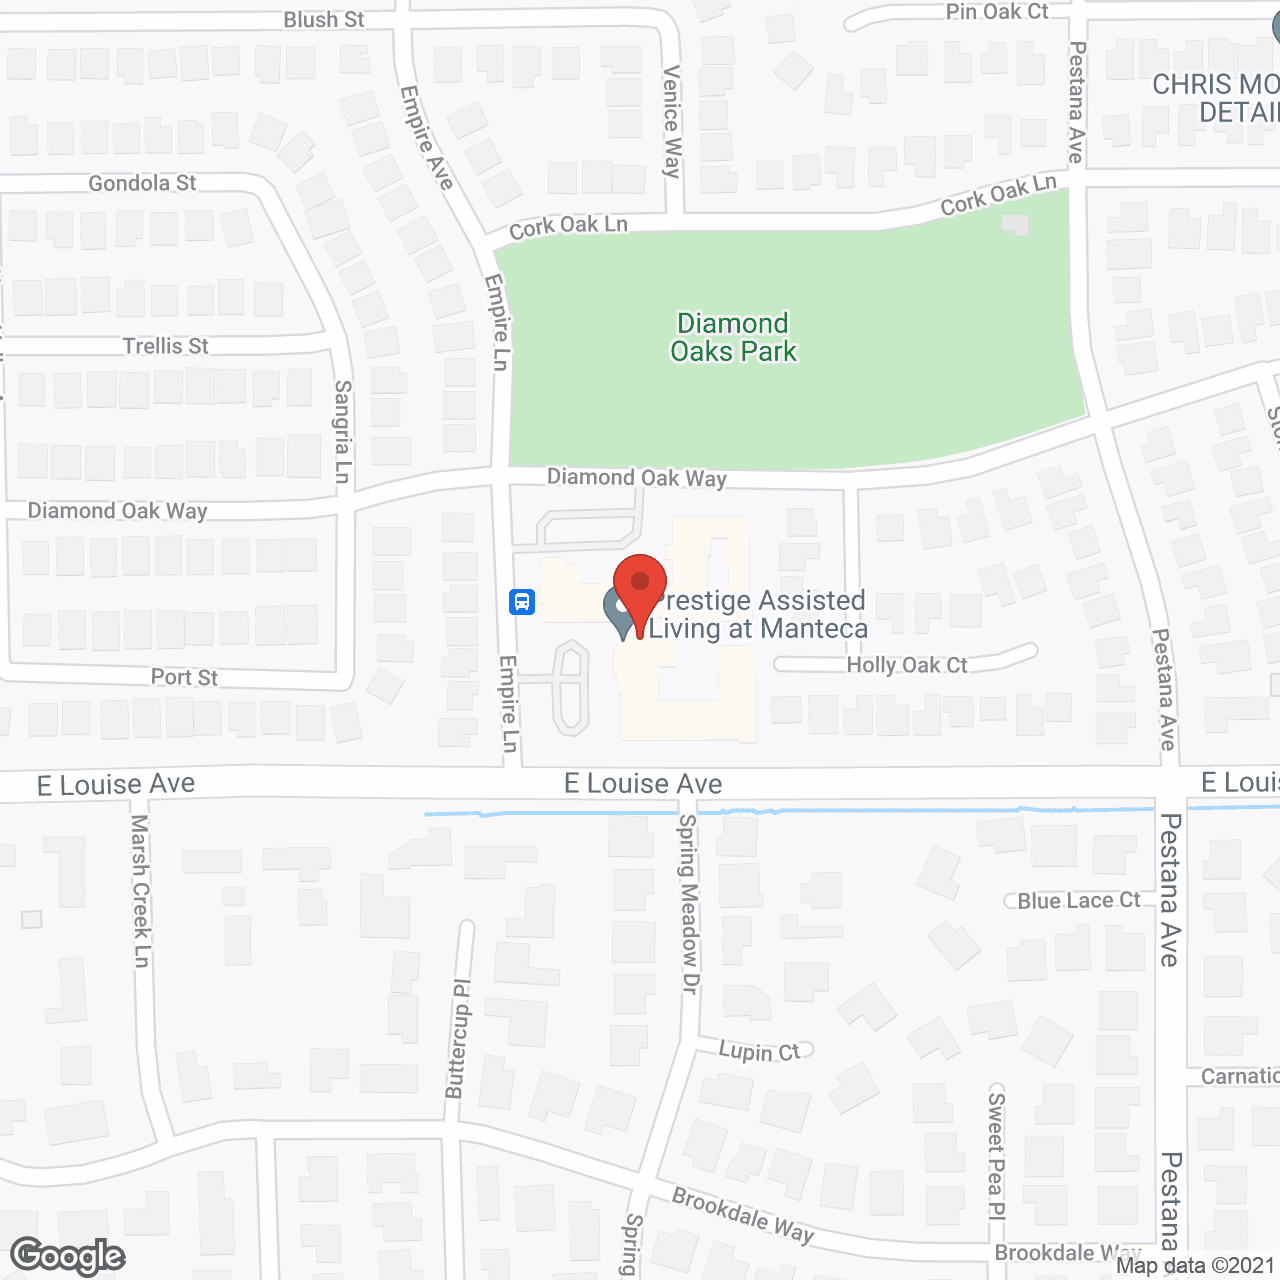 Prestige Assisted Living at Manteca in google map